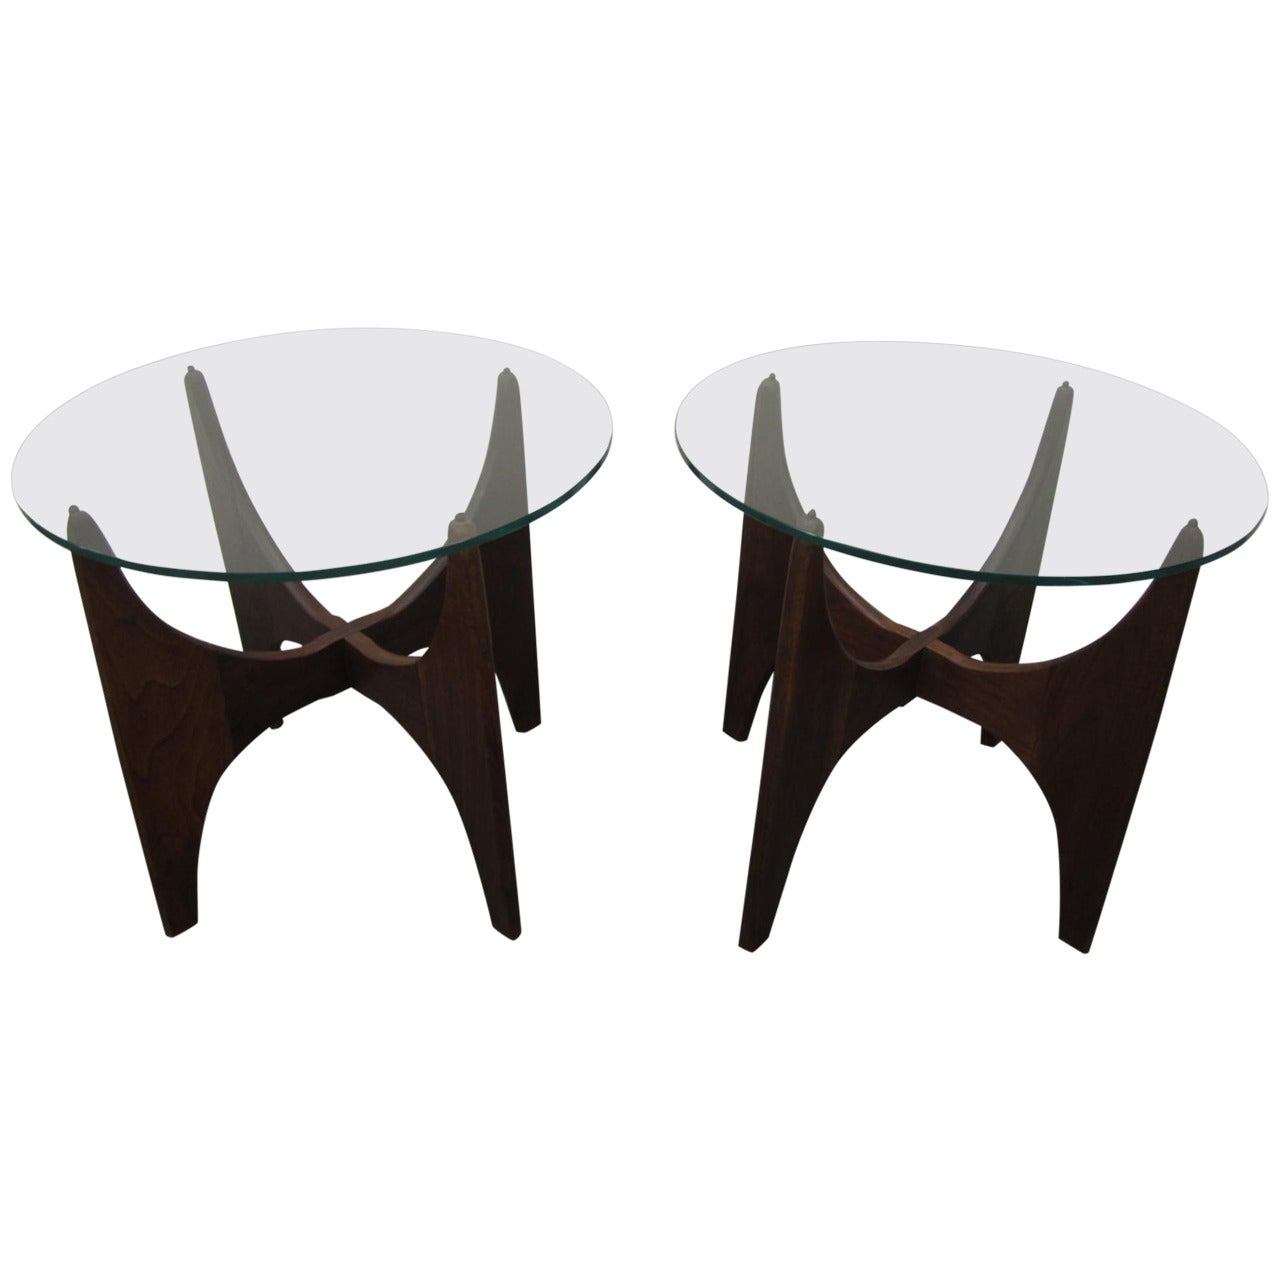 Lovely Pair of Sculptural Walnut Adrian Pearsall End Tables Mid-Century Modern